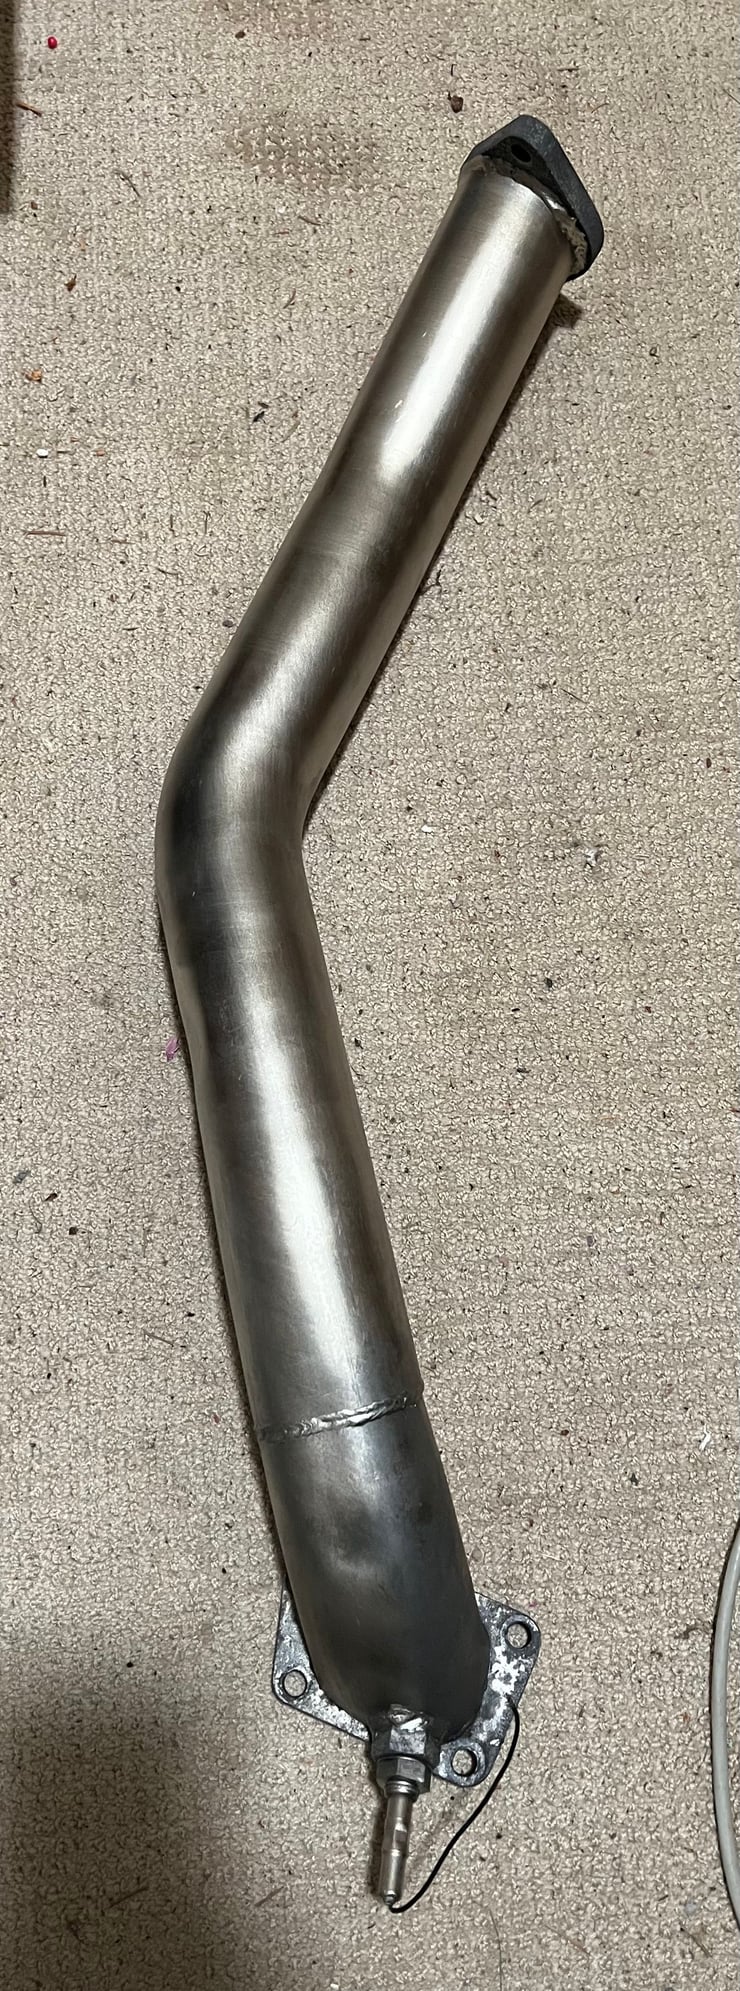 Engine - Exhaust - Downpipes - knightsports, Maxim works/auto exe/mazdaspeed, and an unknown. - Used - 1993 to 2002 Mazda RX-7 - Edmonds, WA 98020, United States